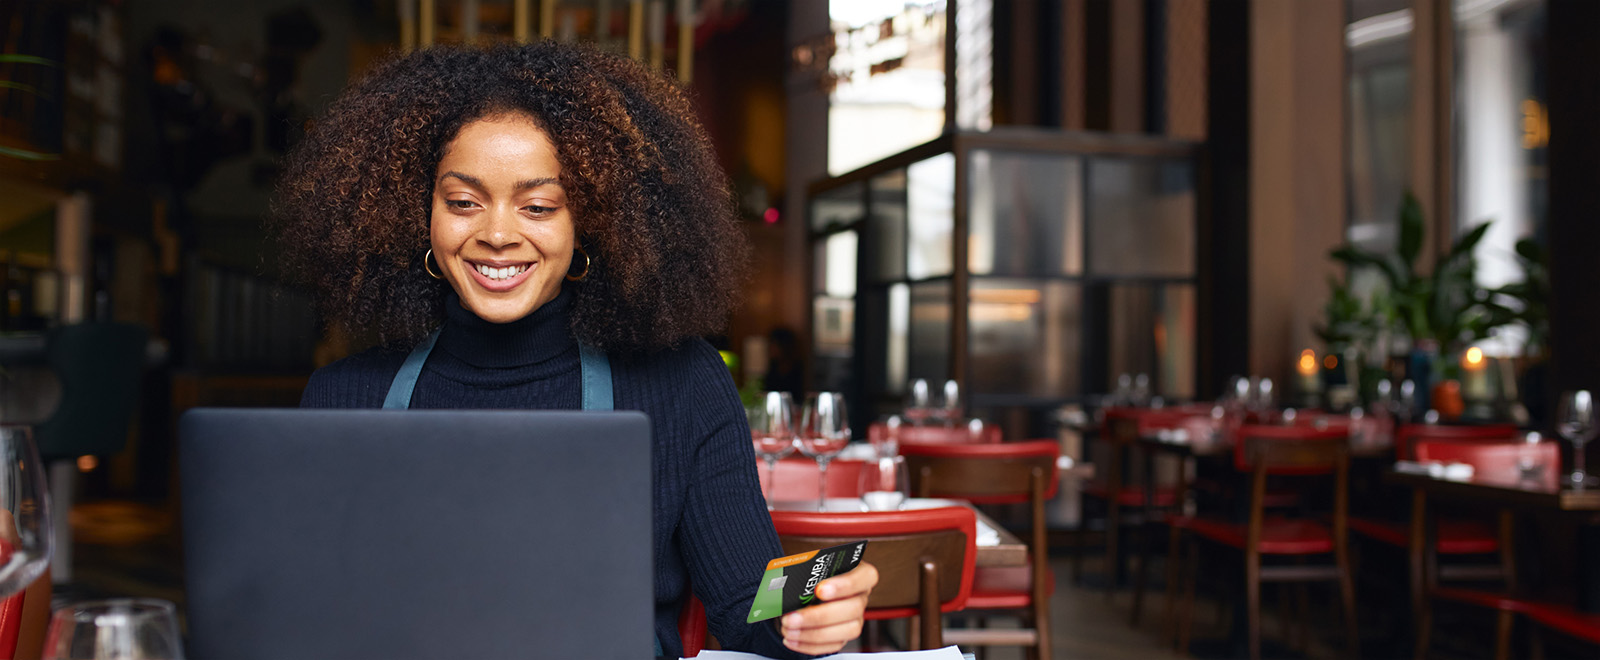 A woman sitting in a restaurant, smiling at her laptop while holding a credit card.